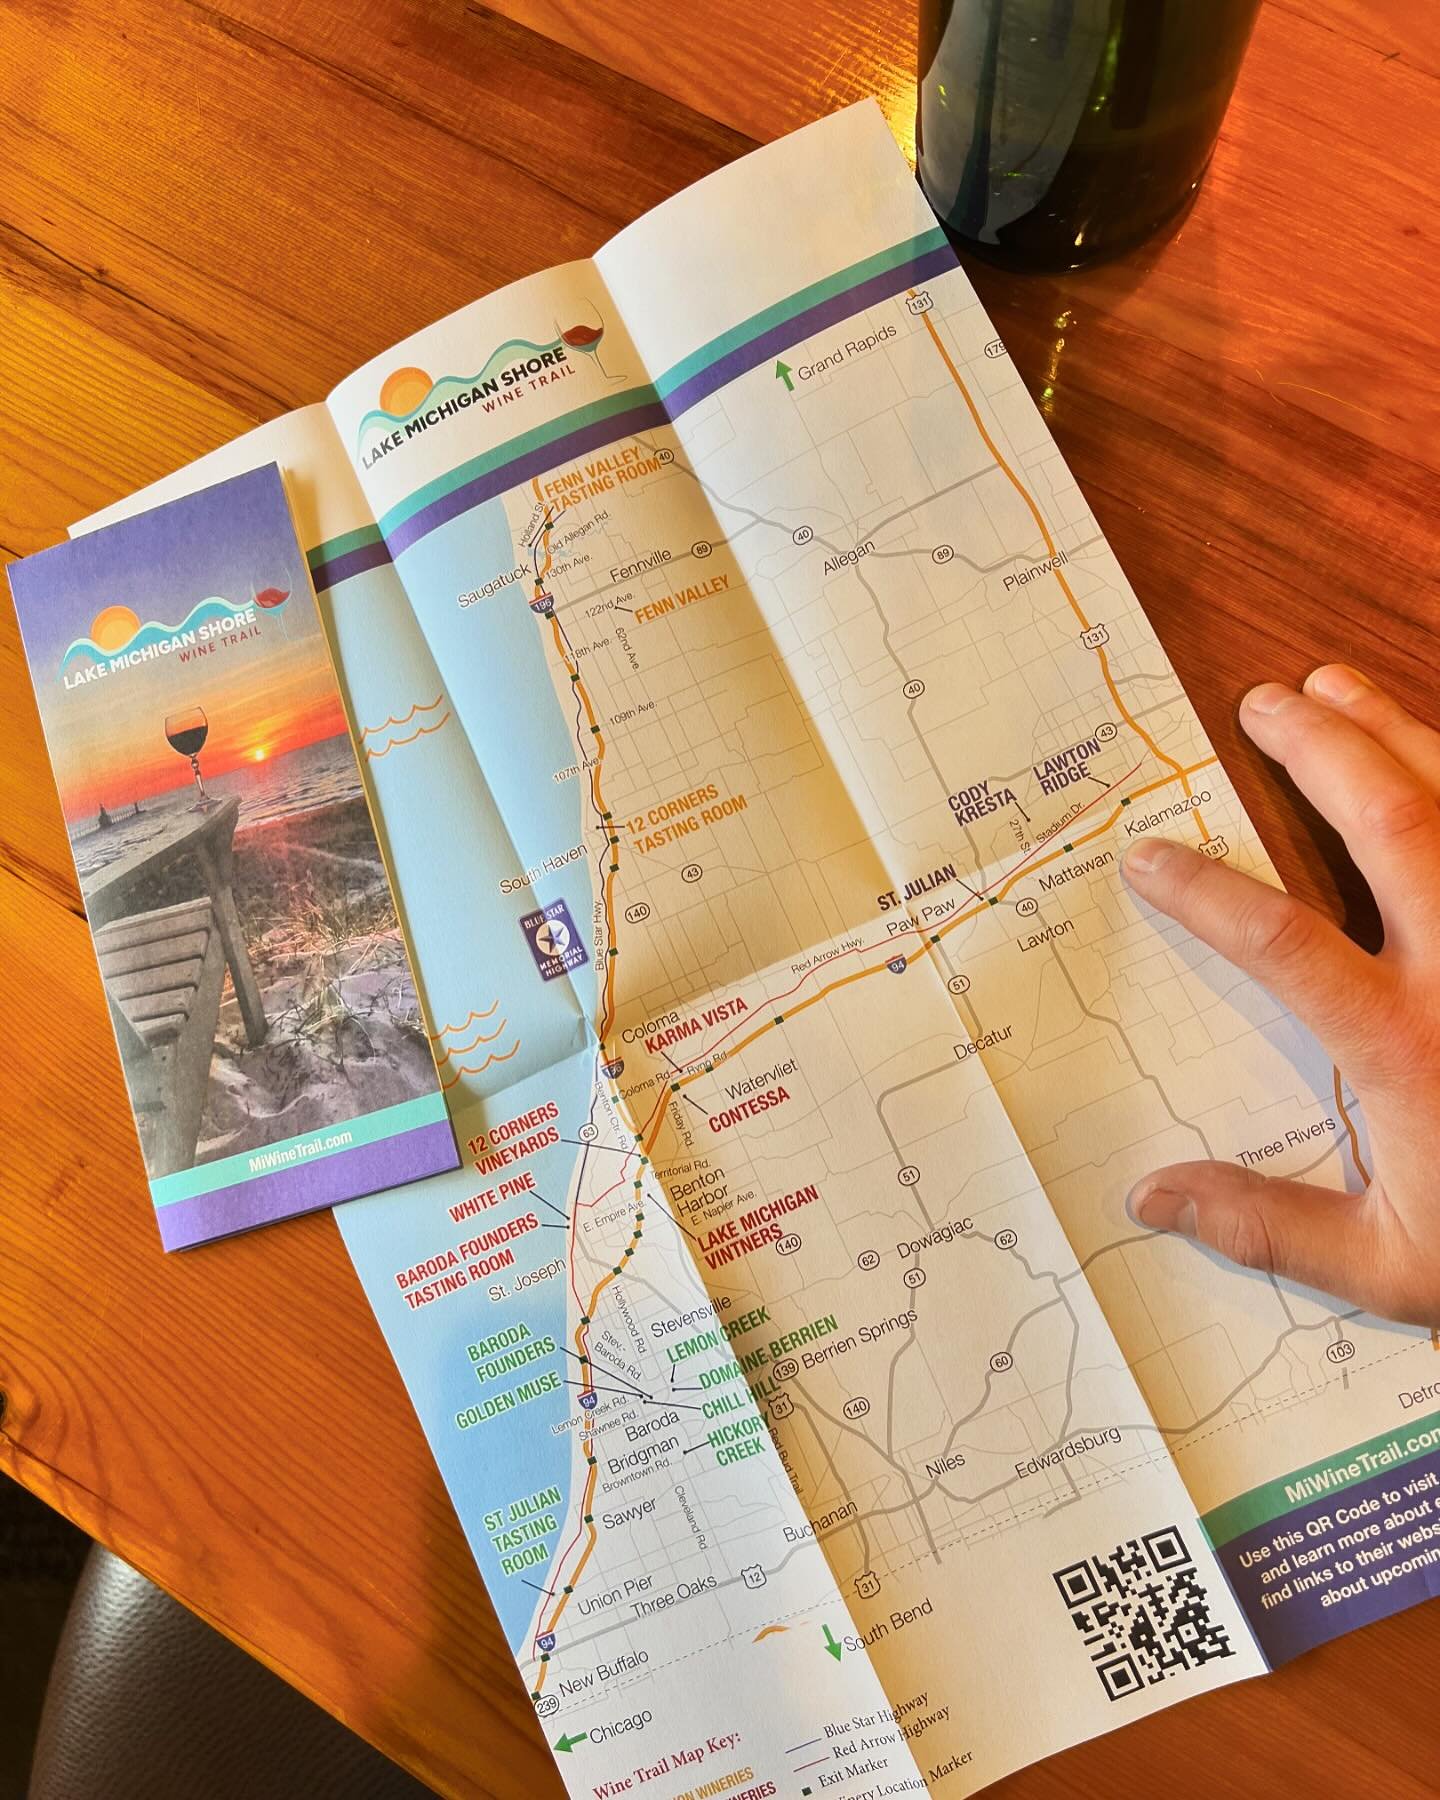 We found your weekend plans - enjoying the Lake Michigan Shore Wine Trail! Our winery tasting room in Kalamazoo is a great place to start or end your tour of the @miwinetrail. Grab a map in the tasting room to plan your route.